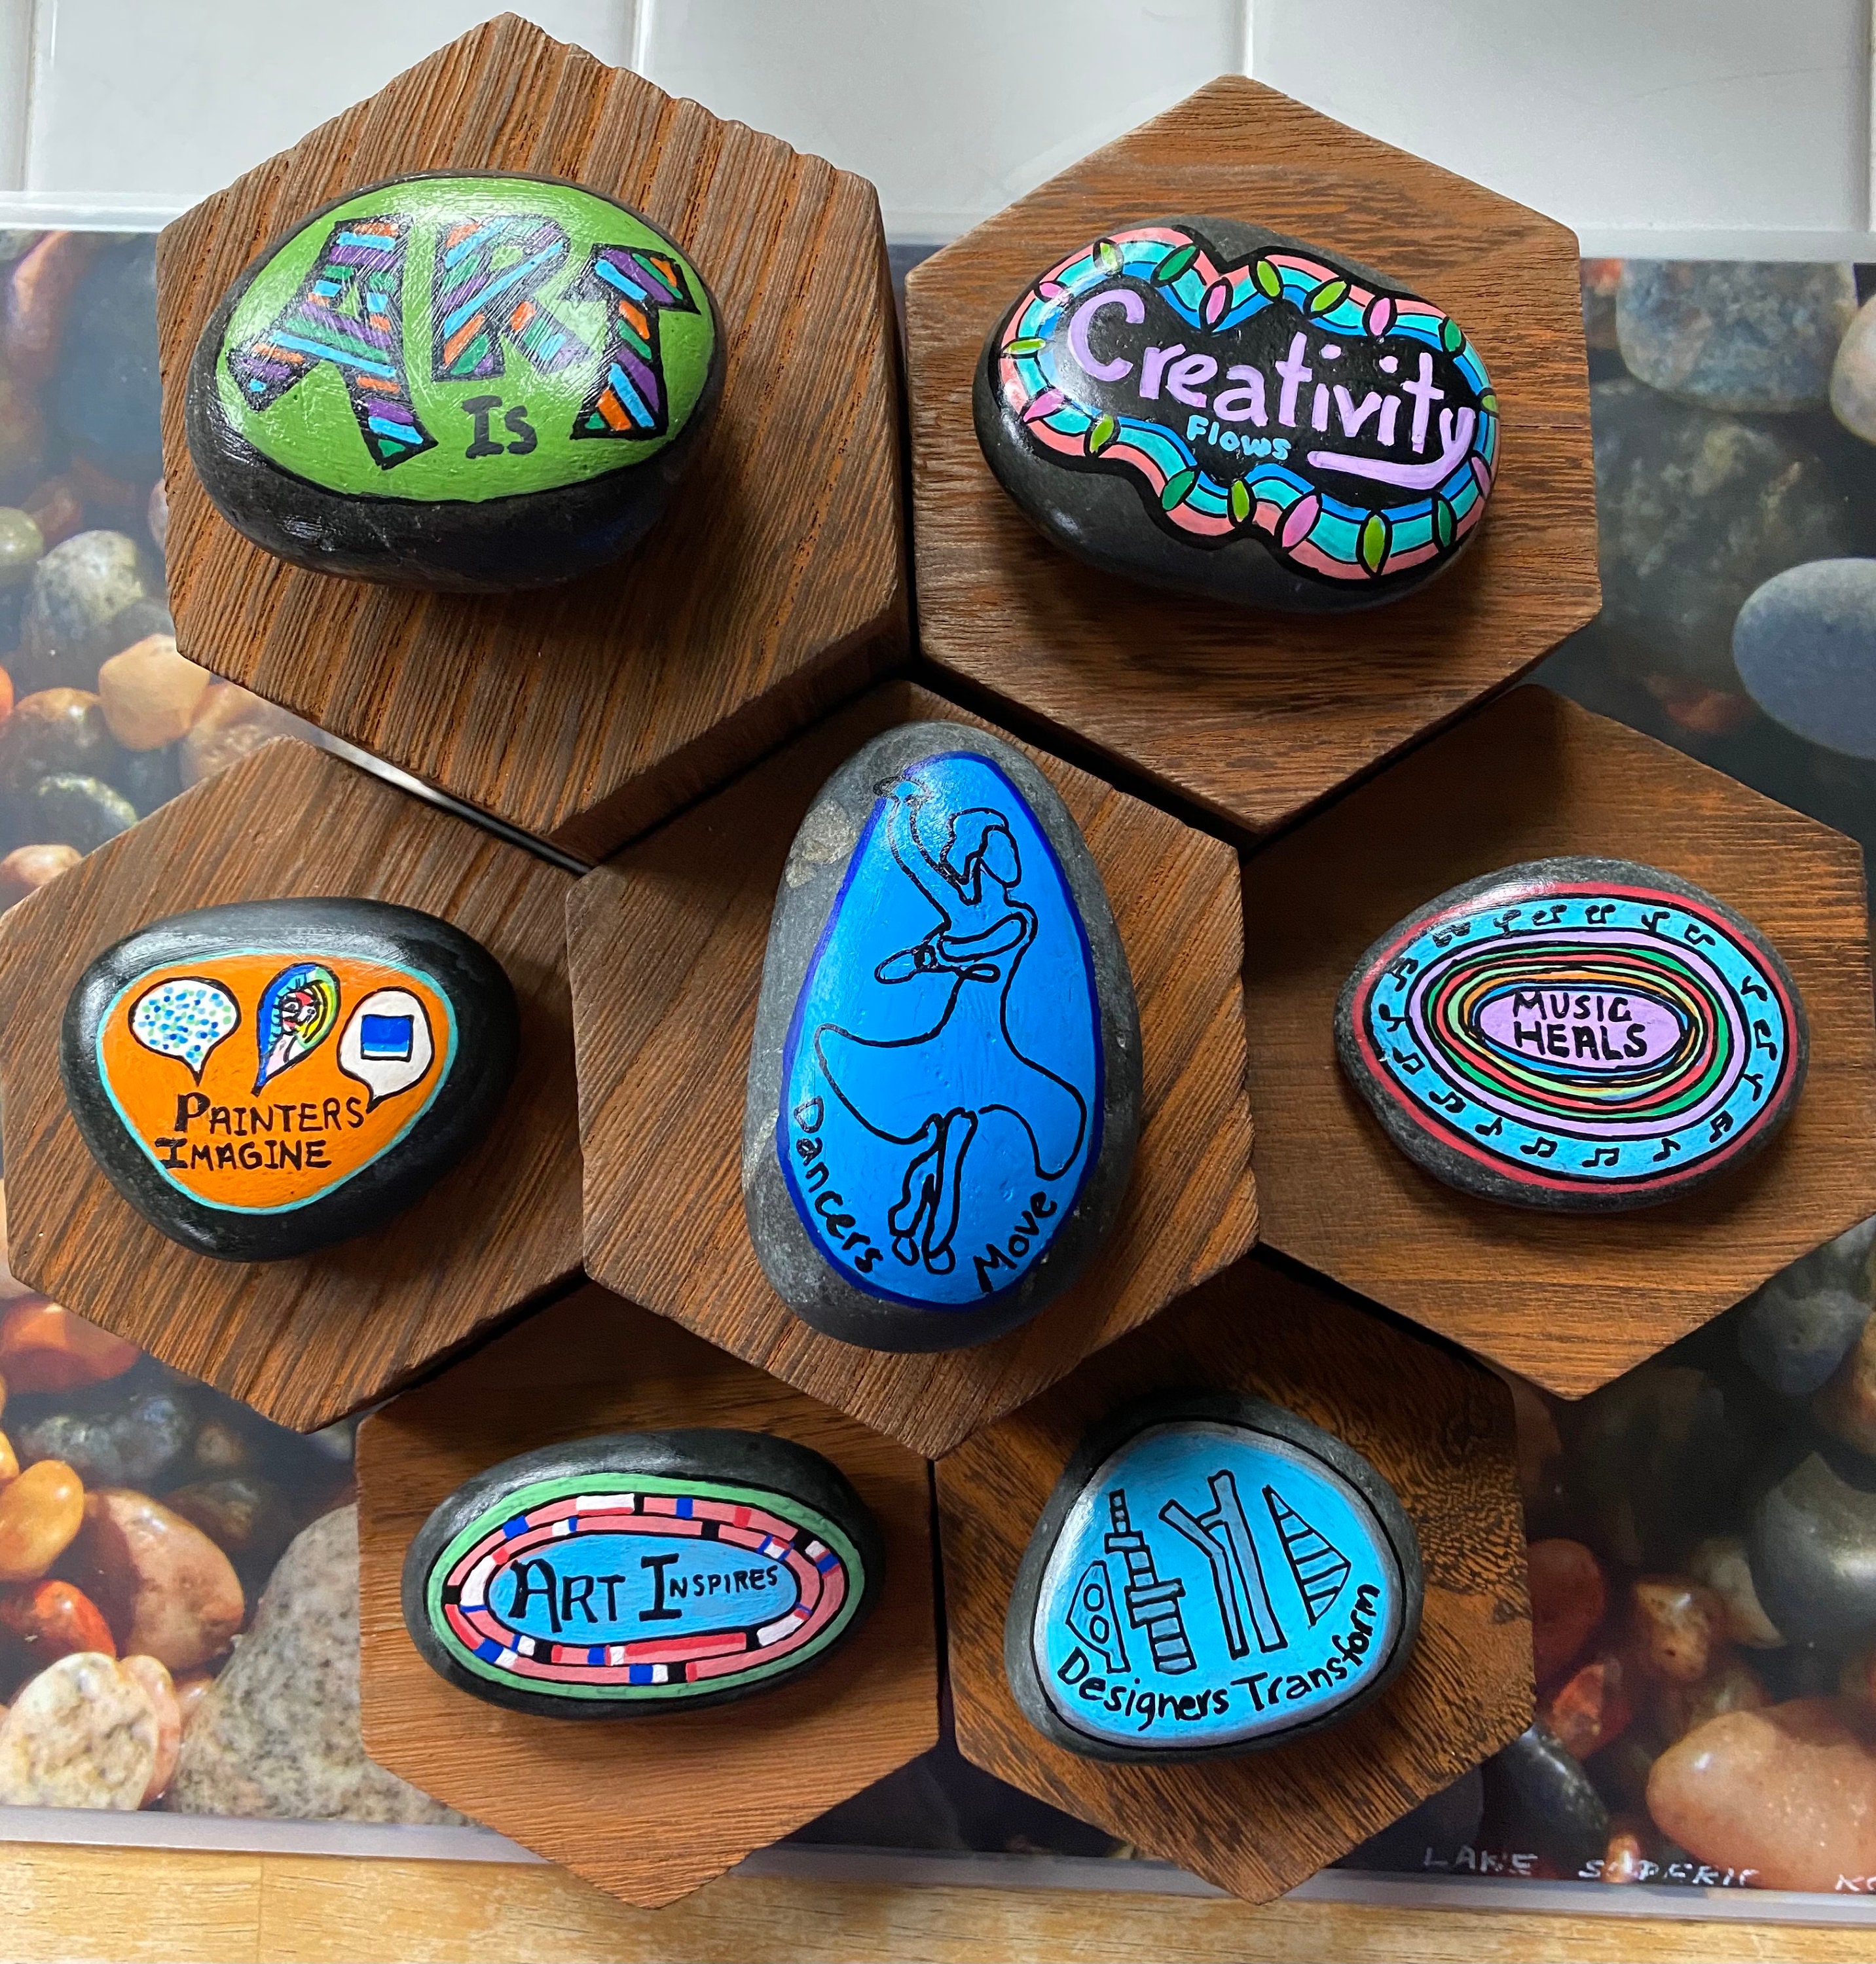 Painting rocks for last-minute gifts